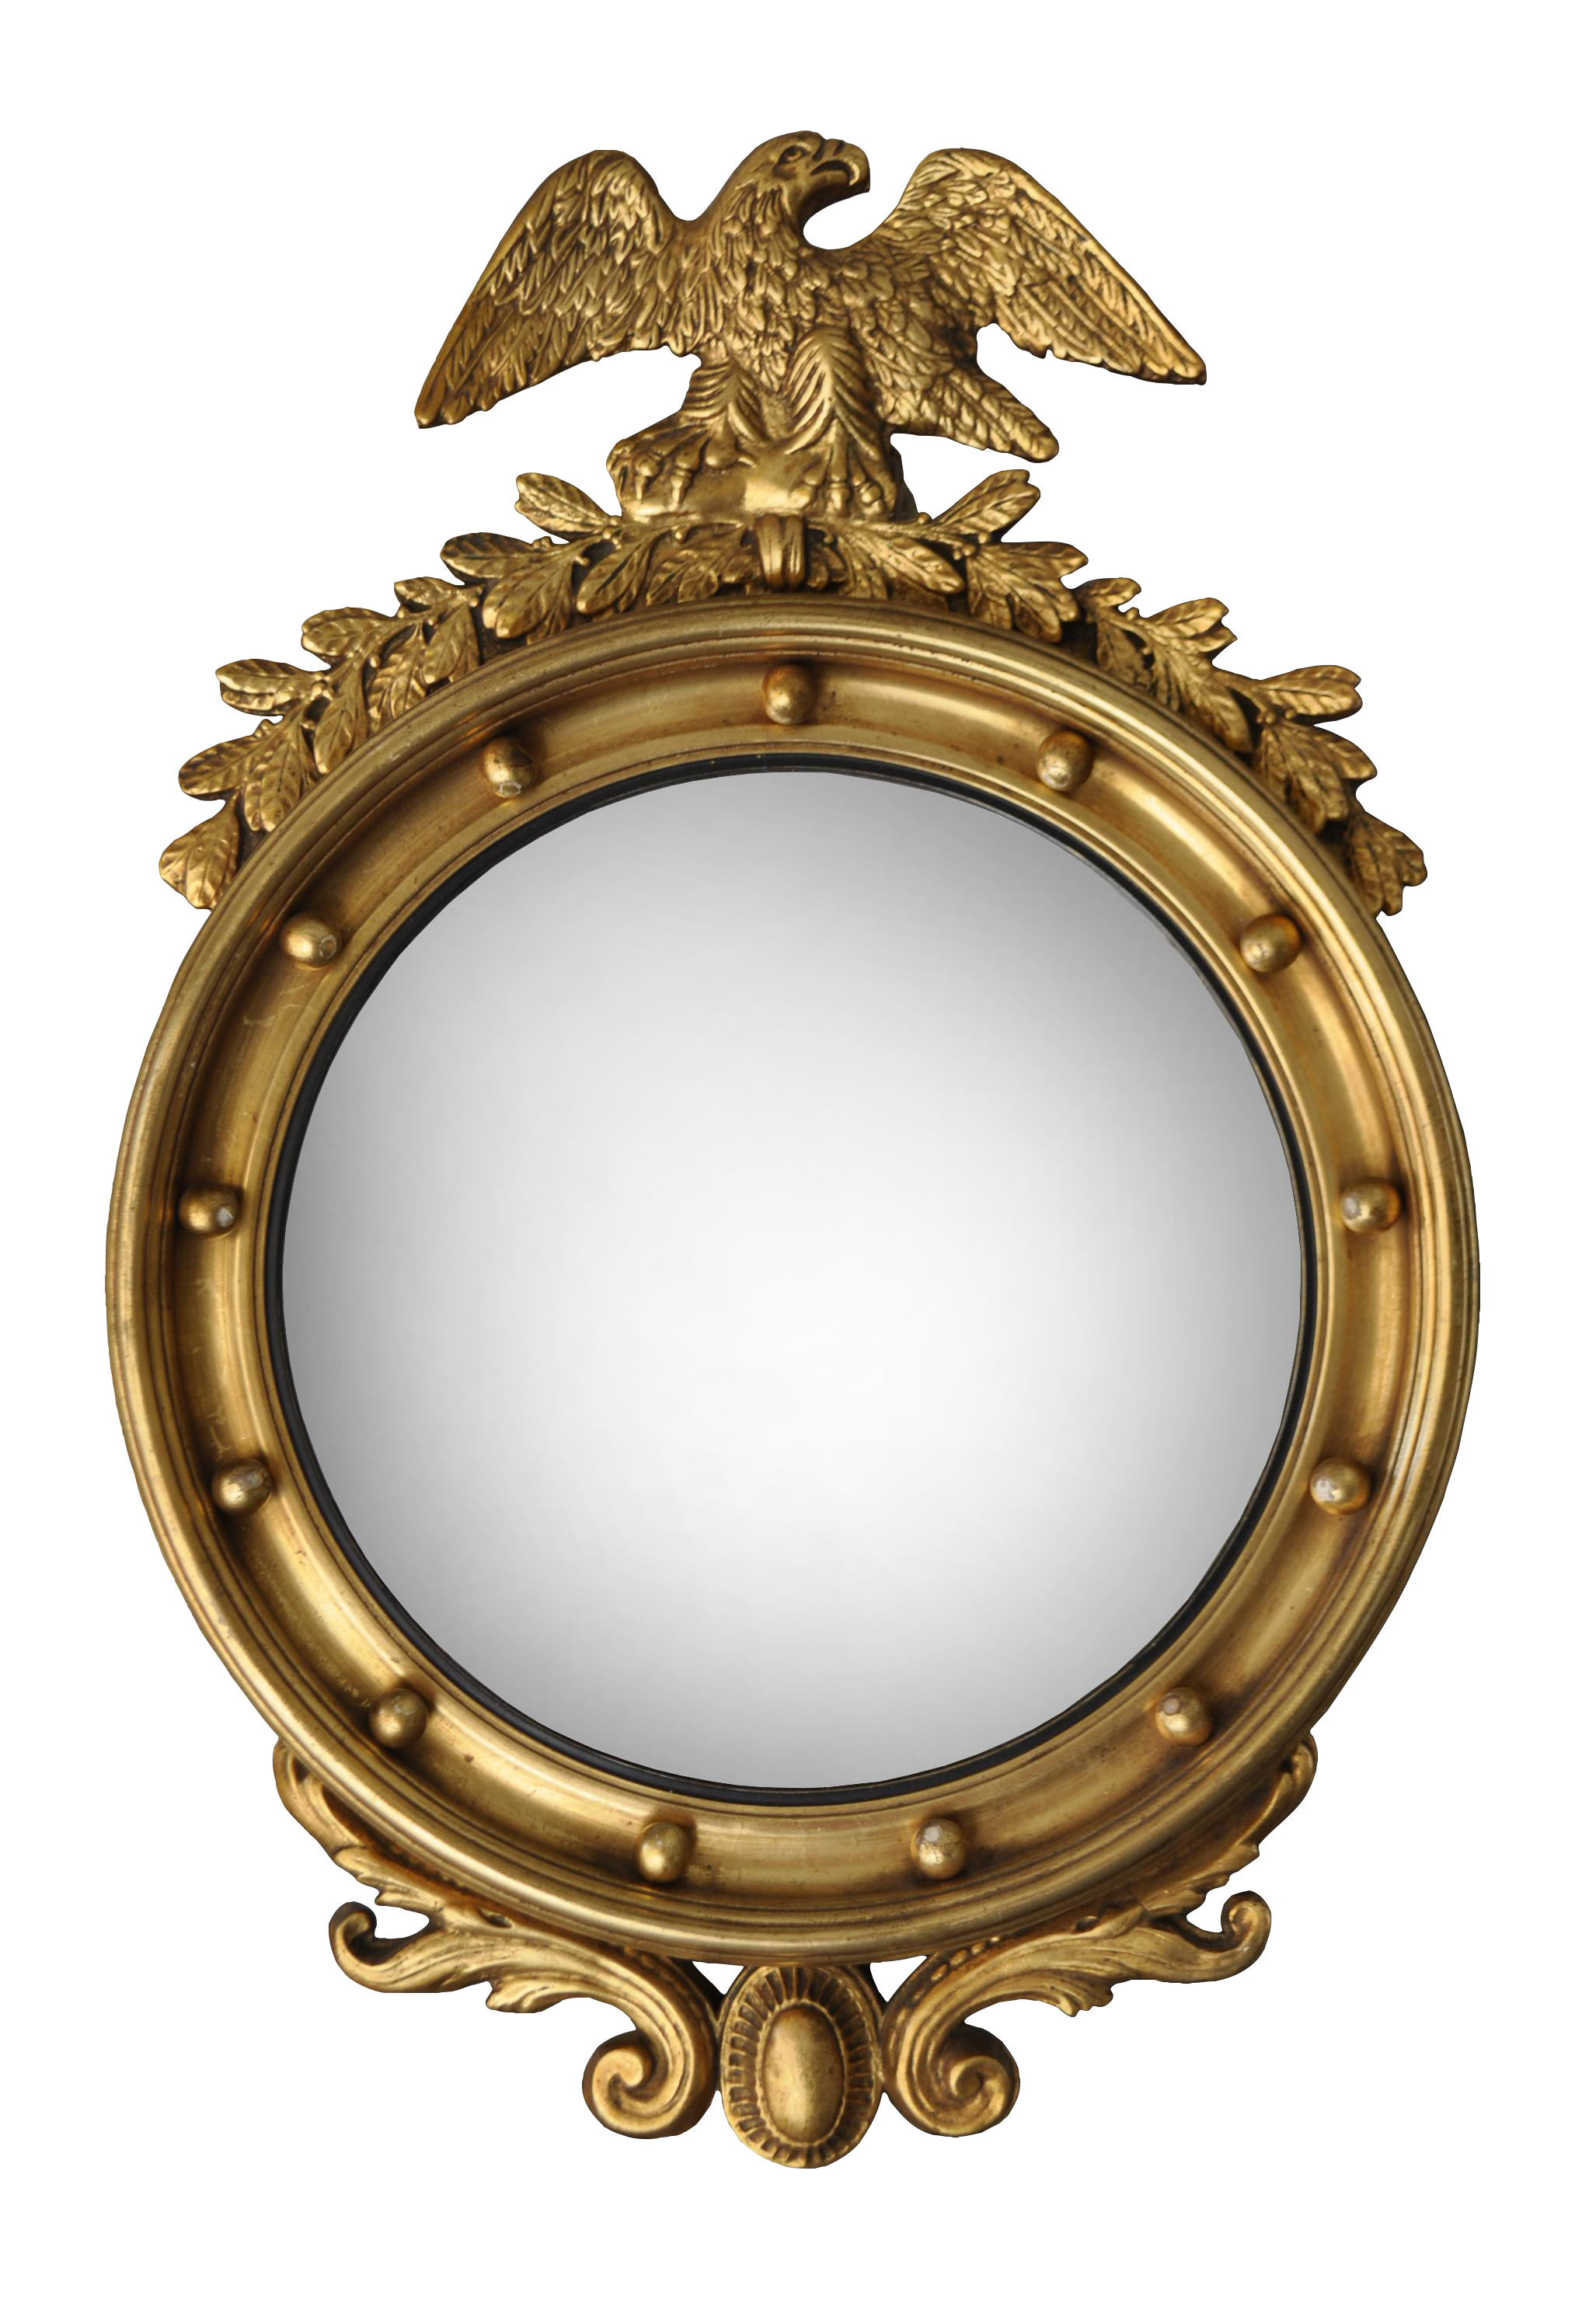 vintage-gilt-federal-style-convex-mirror-5904.png